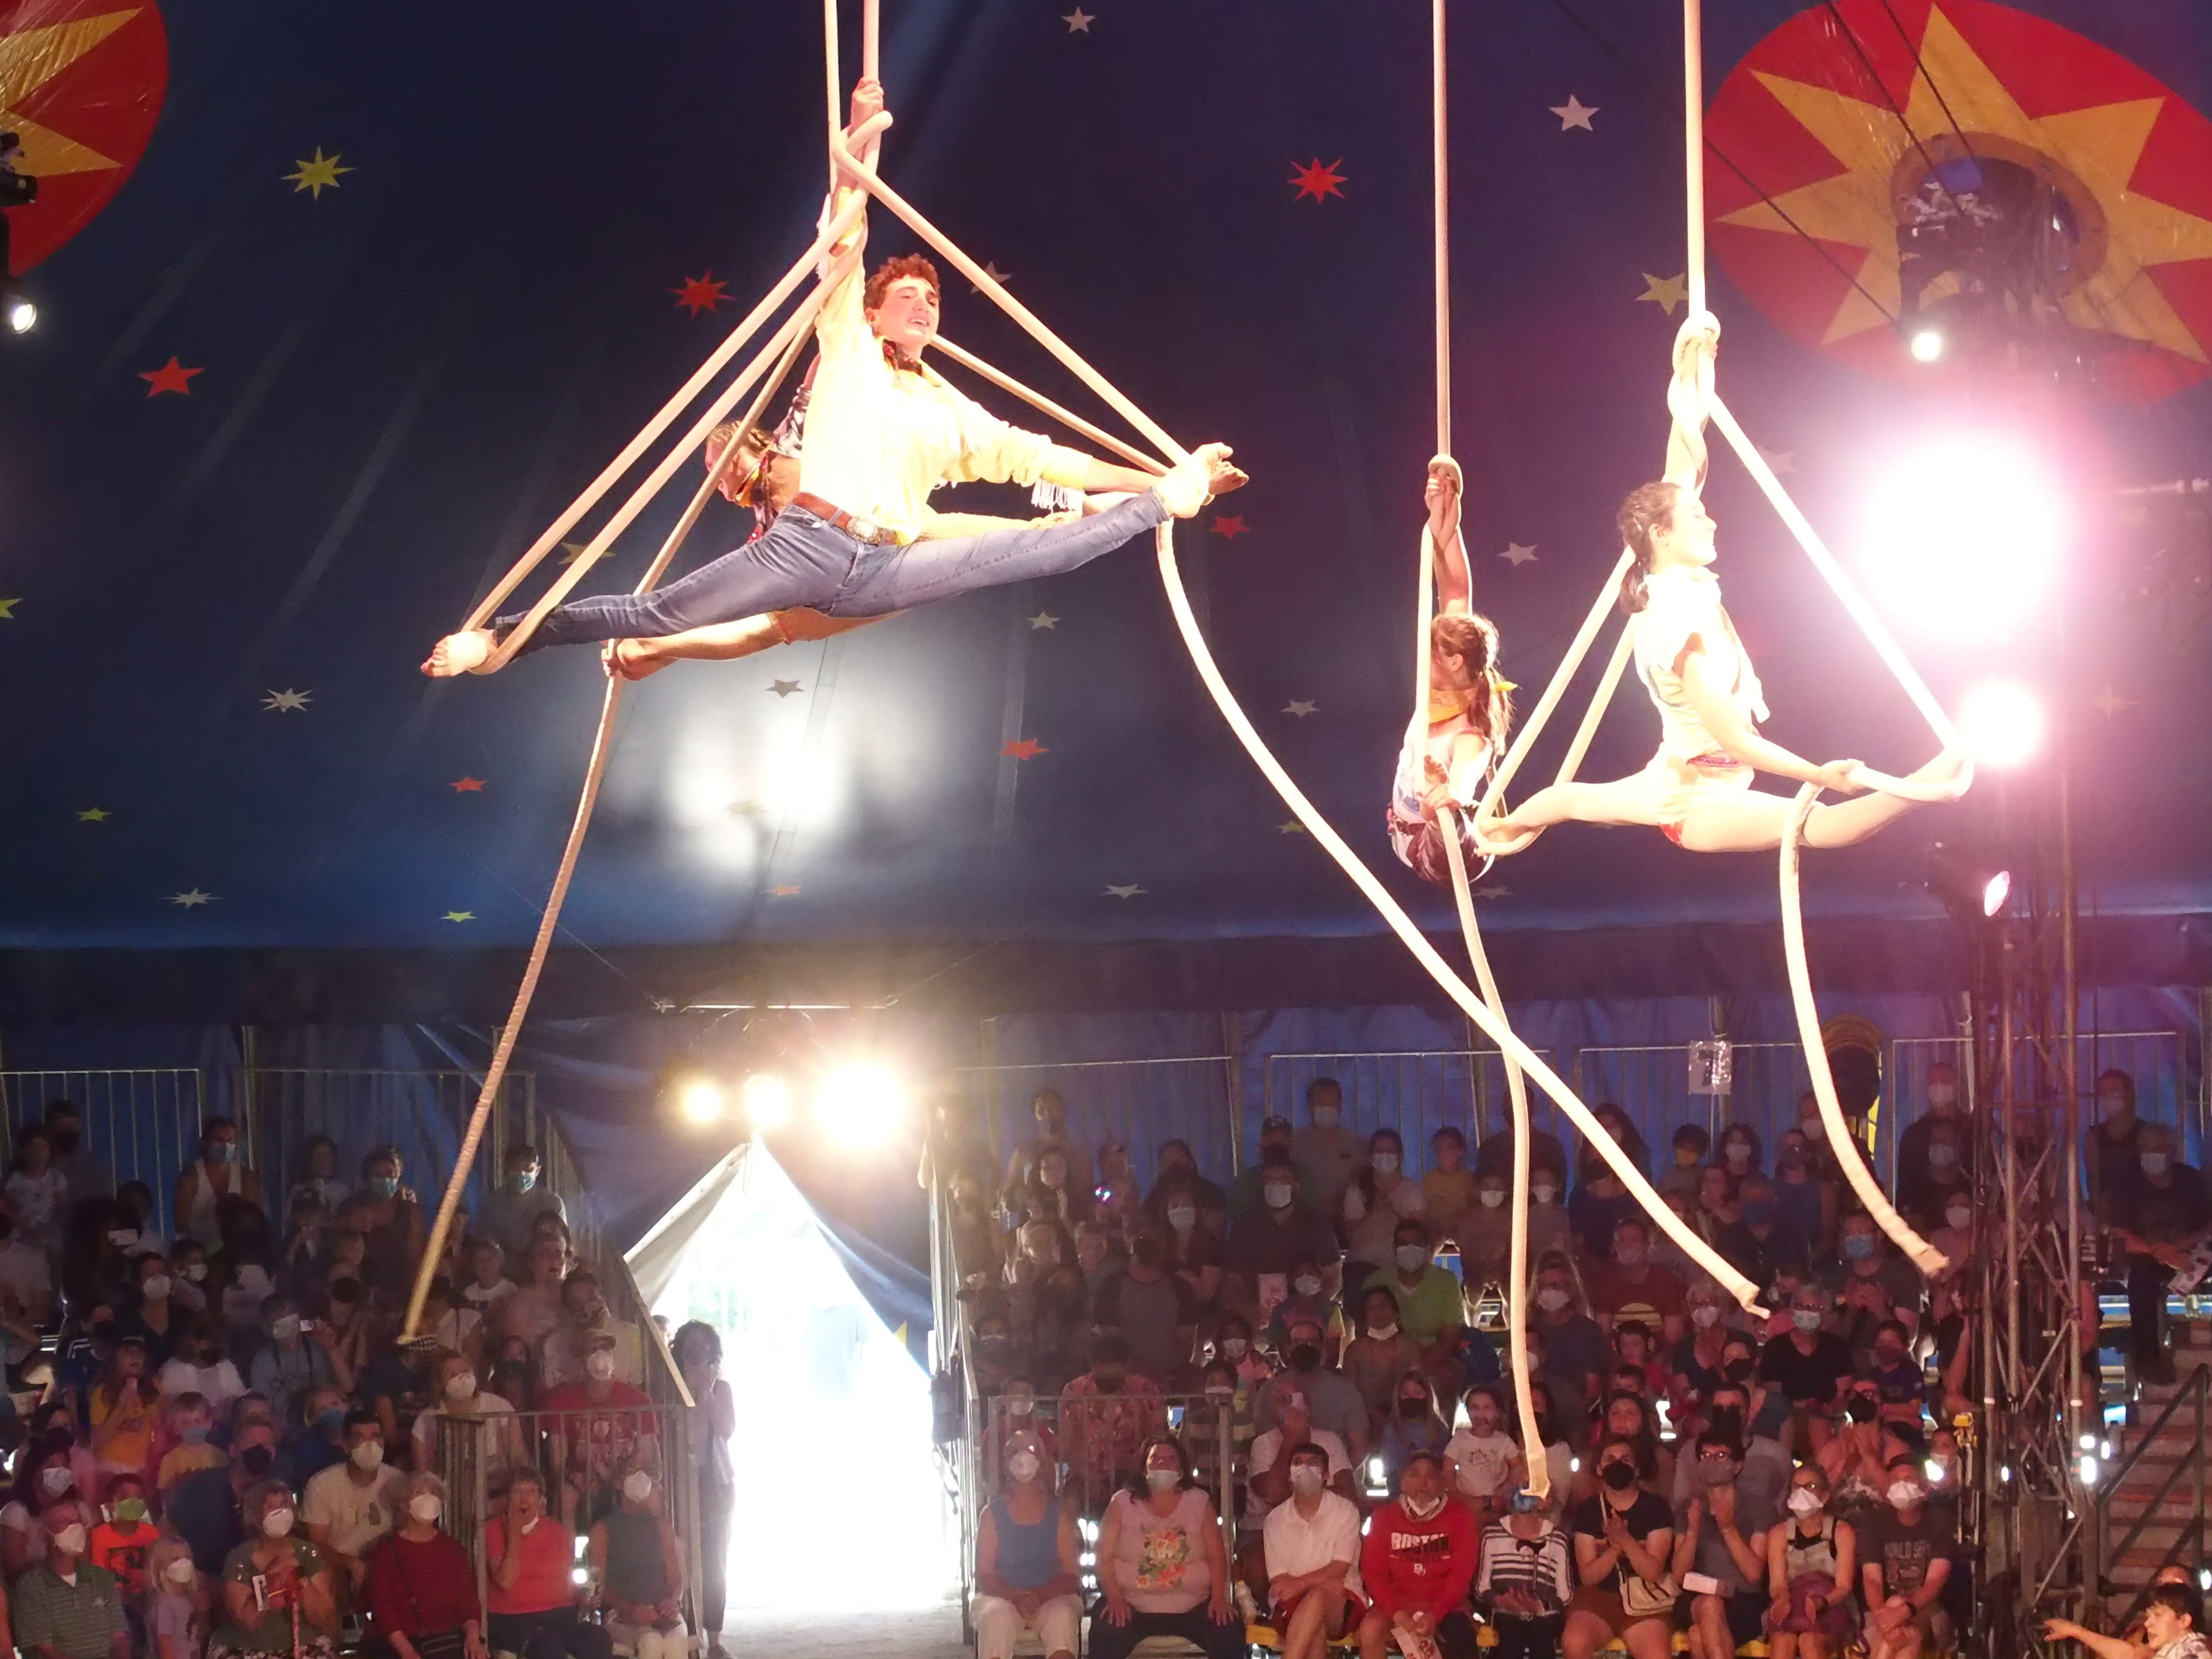 Aerialists #18